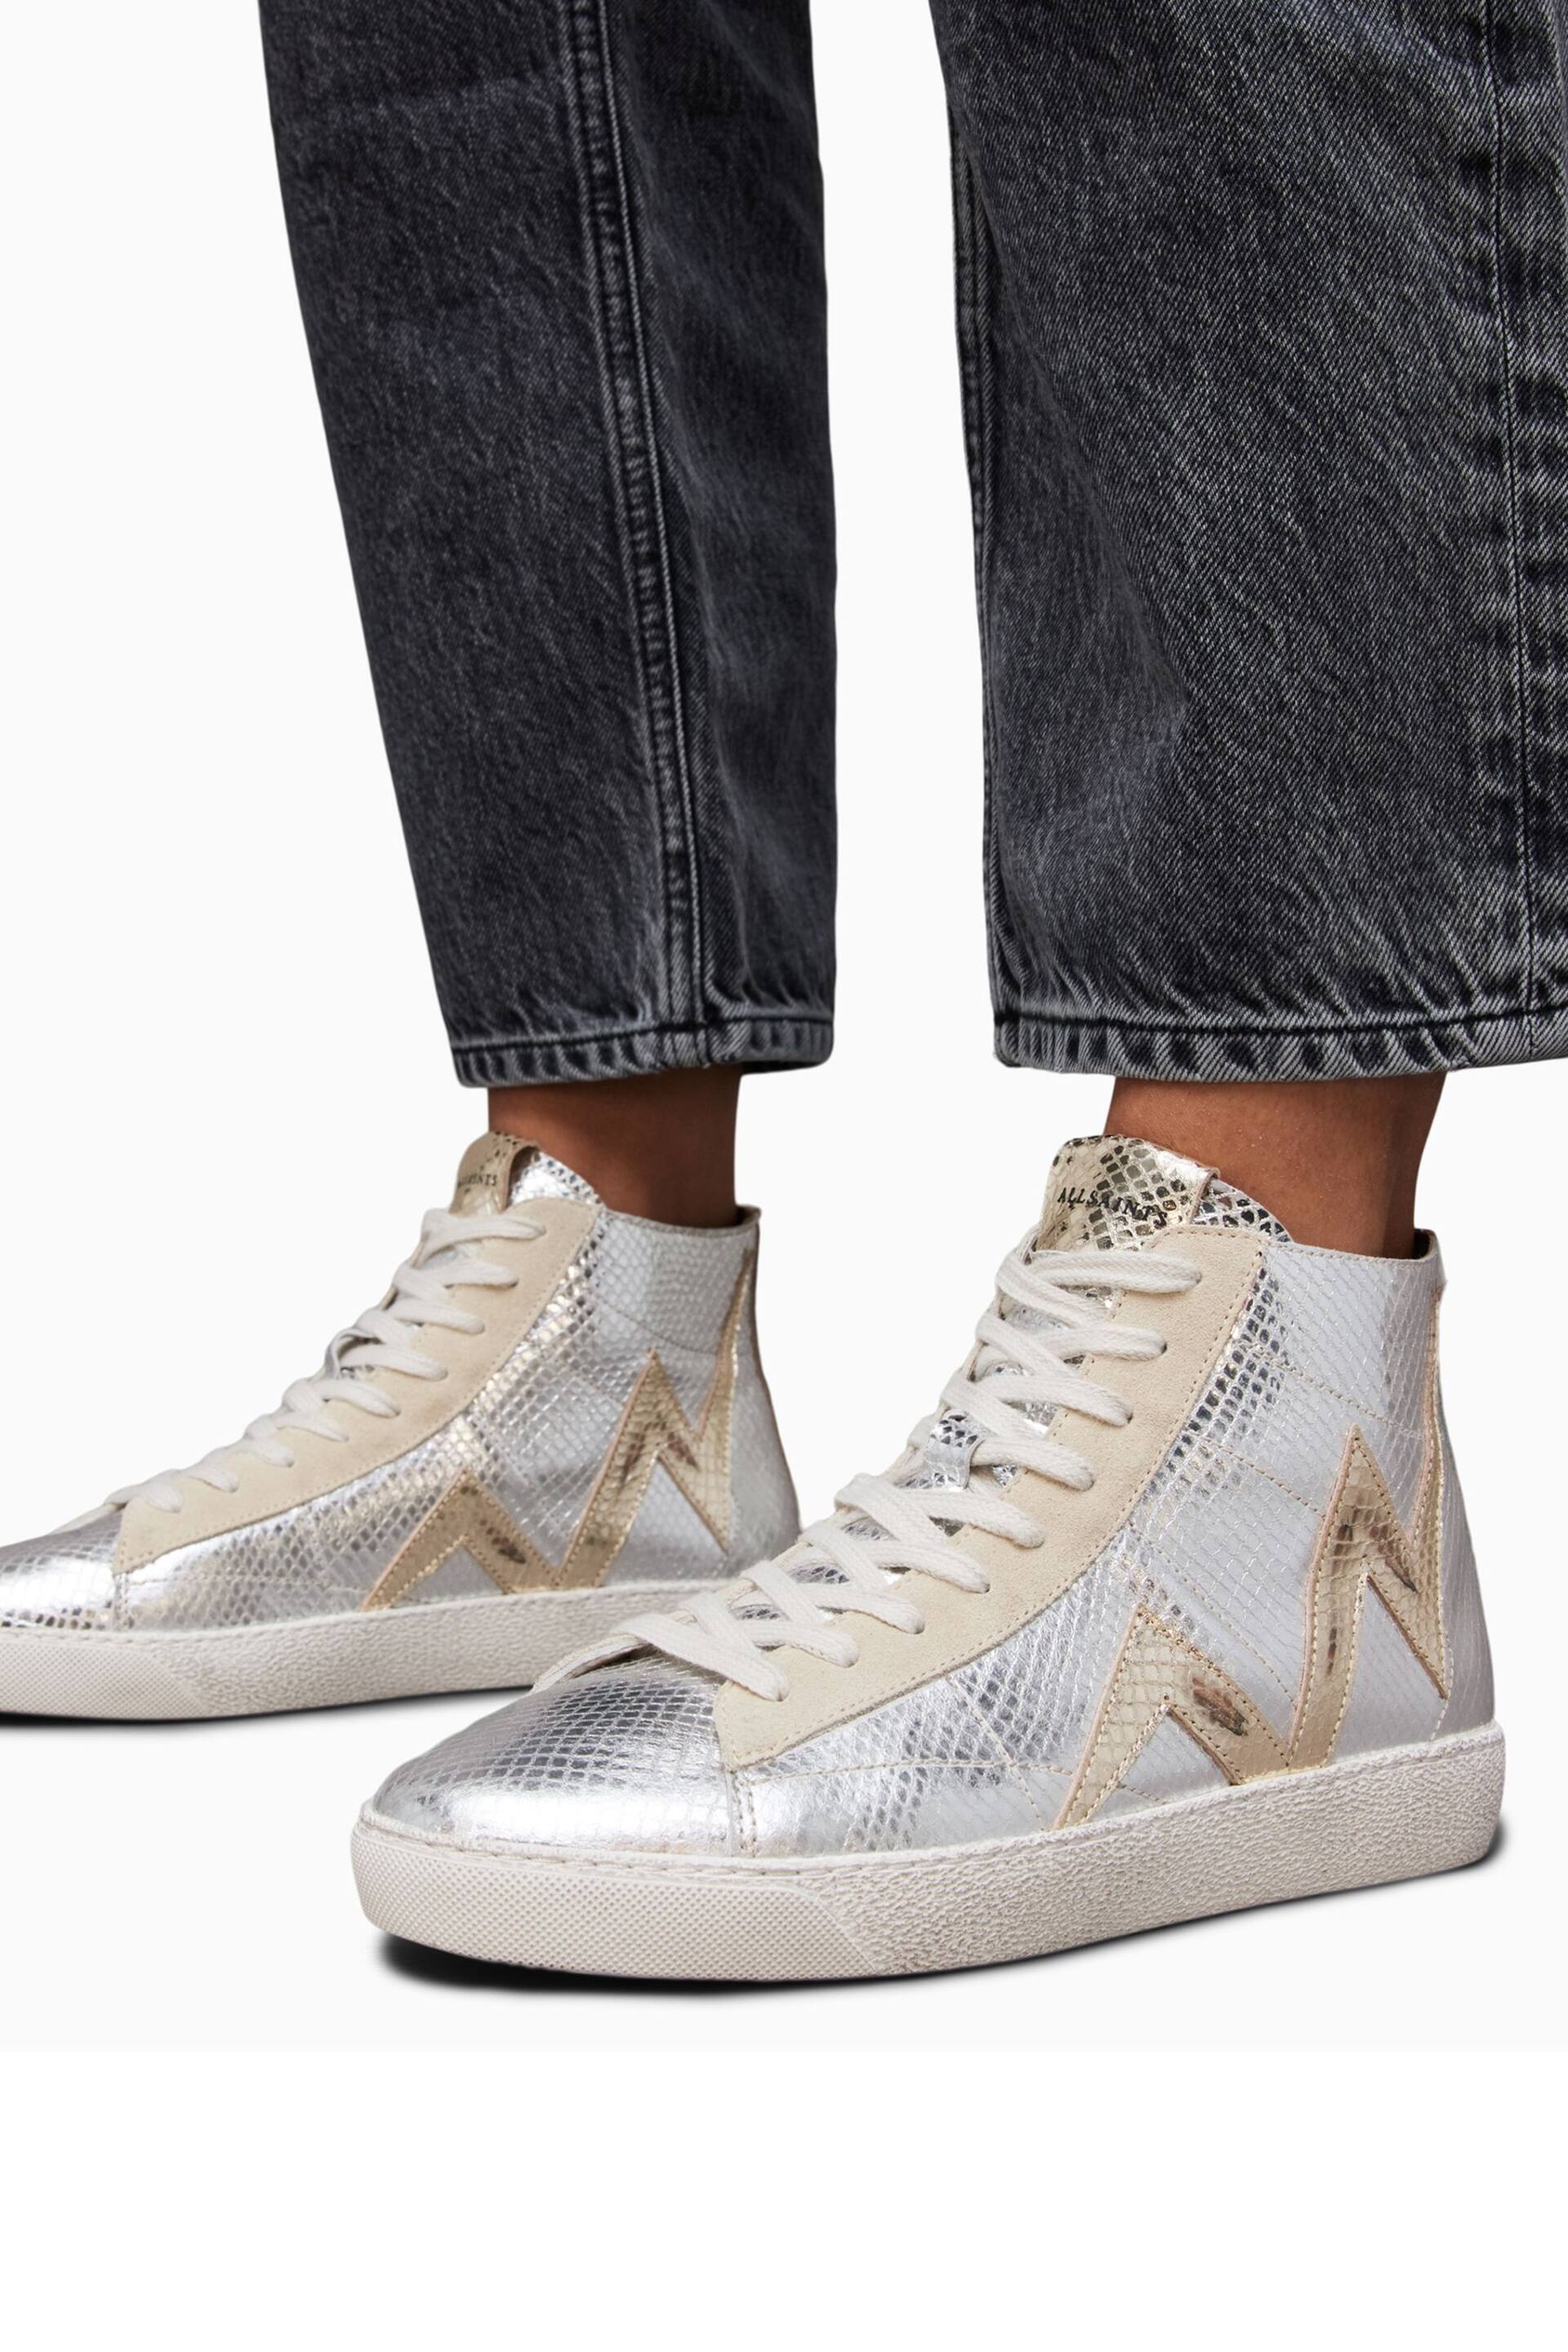 AllSaints Gold Tundy Bolt Met High Trainers - Image 6 of 6